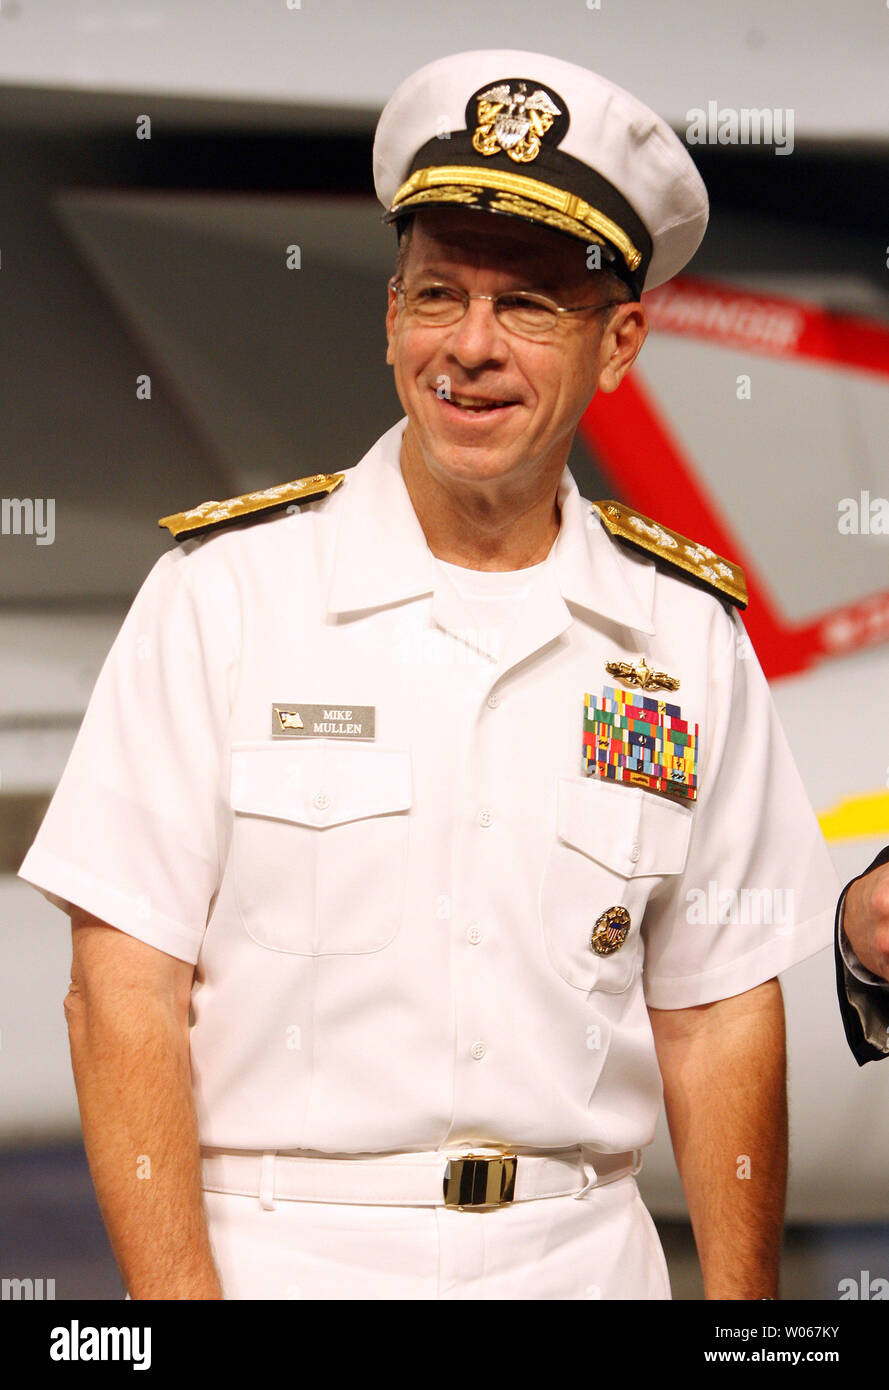 Admiral Michael Mullen, Chief of Naval Operations for the United States Navy, arrives for the ceremonial rollout of the new EA-18G Growler airborne electronic aircraft, at the  Boeing aircraft assembly plant in St. Louis on August 3, 2006. The plane is a two-seat F/A-18F Super Hornet with an advanced weapons, sensors and communications systems. (UPI Photo/Bill Greenblatt) Stock Photo